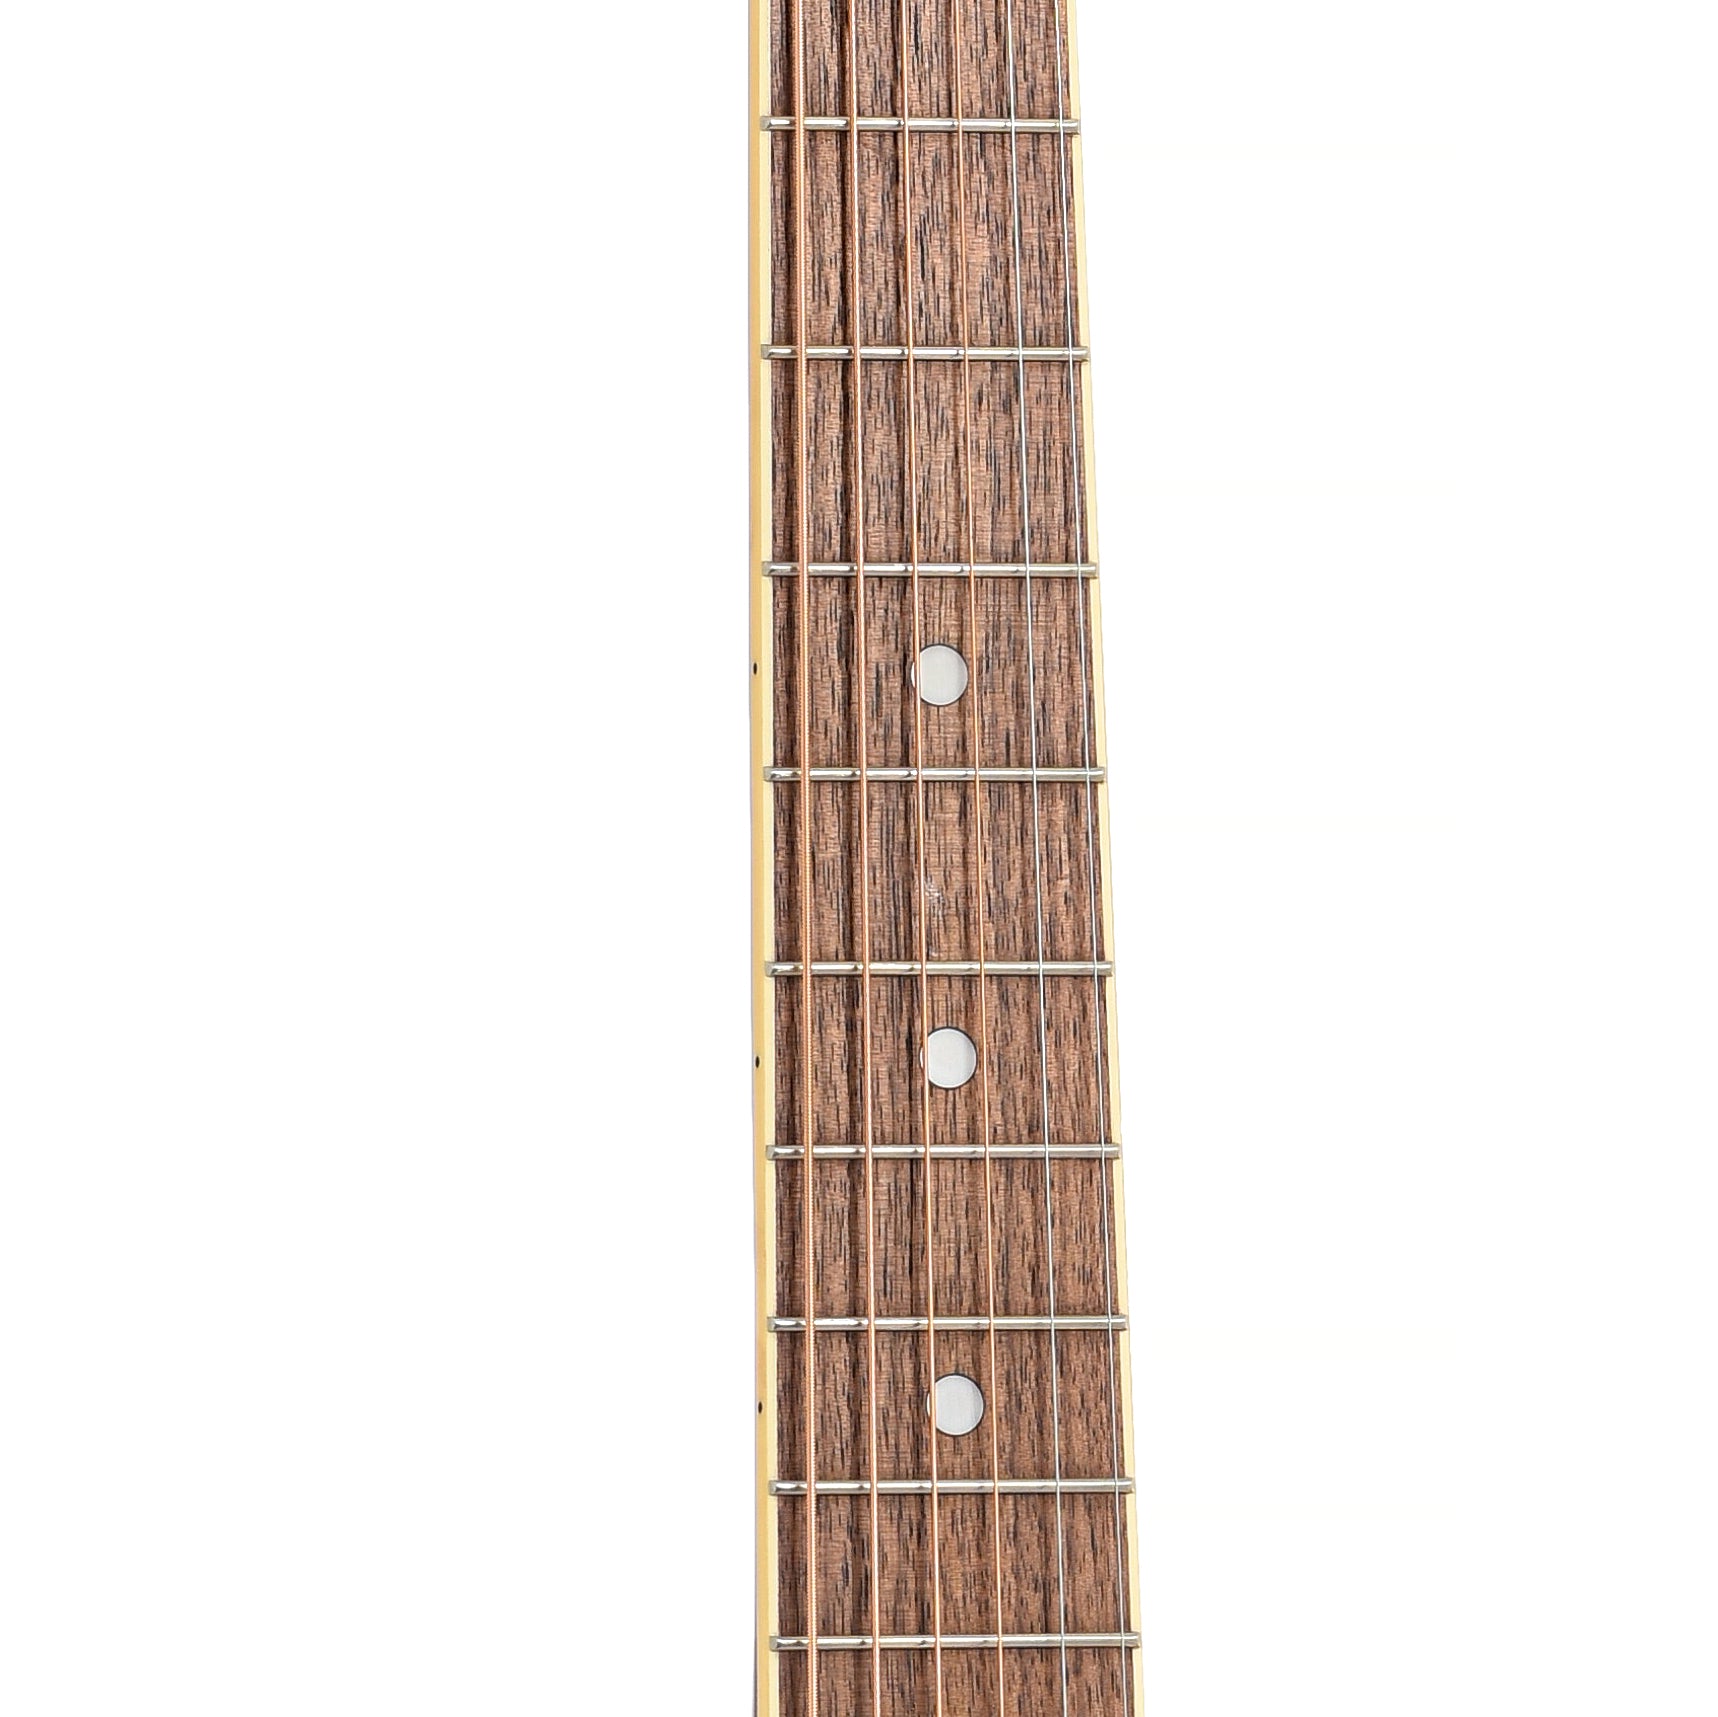 Fretboard of Gretsch Jim Dandy Parlor Acoustic Guitar, Frontier Stain